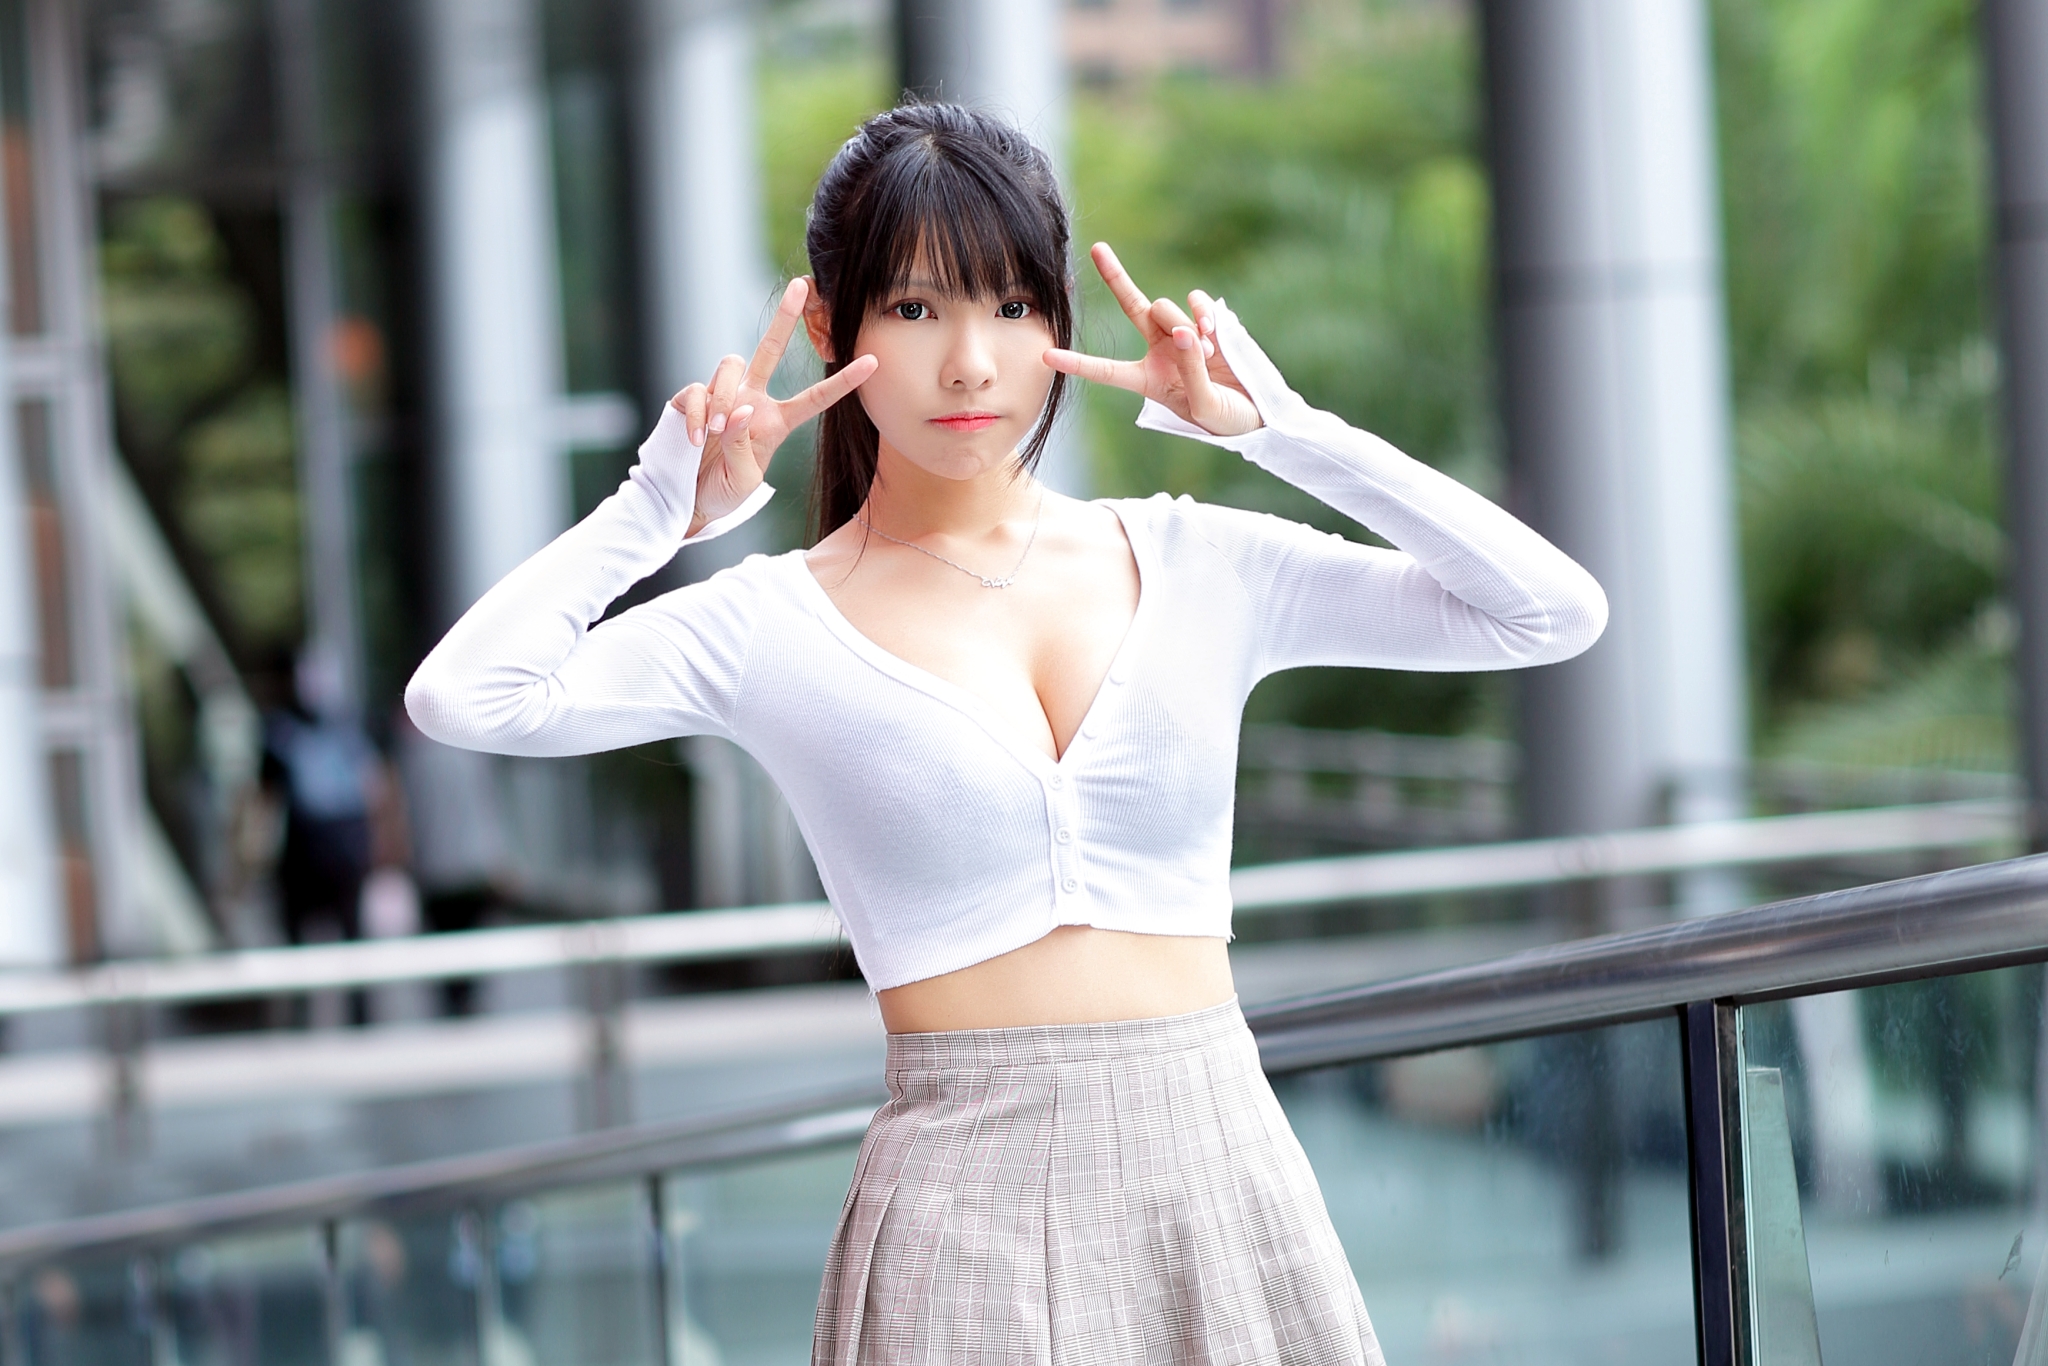 Vicky Women Model Asian Brunette Ponytail Bangs Looking At Viewer Necklace White Tops Depth Of Field 2048x1366